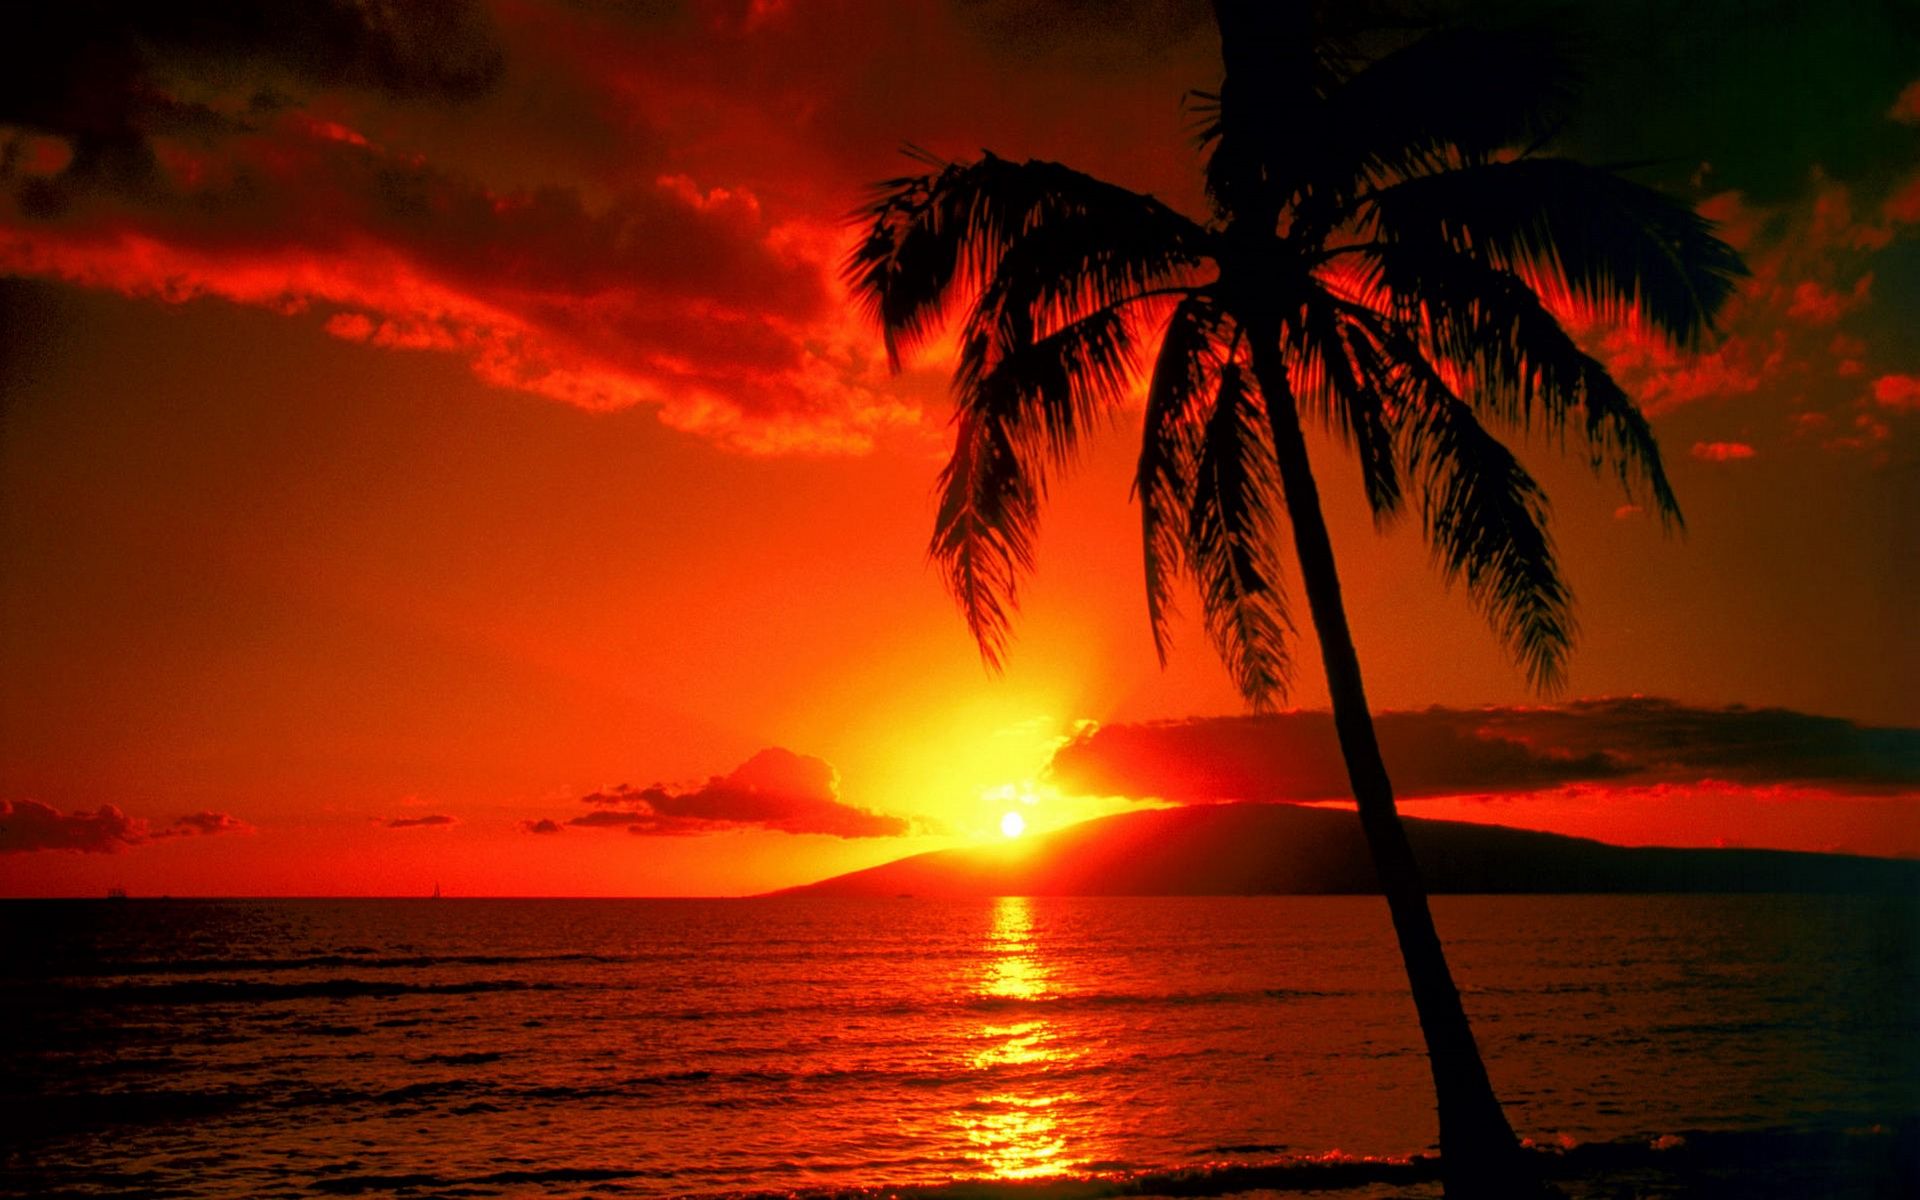 Red sunset over the ocean with a palm tree in the foreground. - Sunset